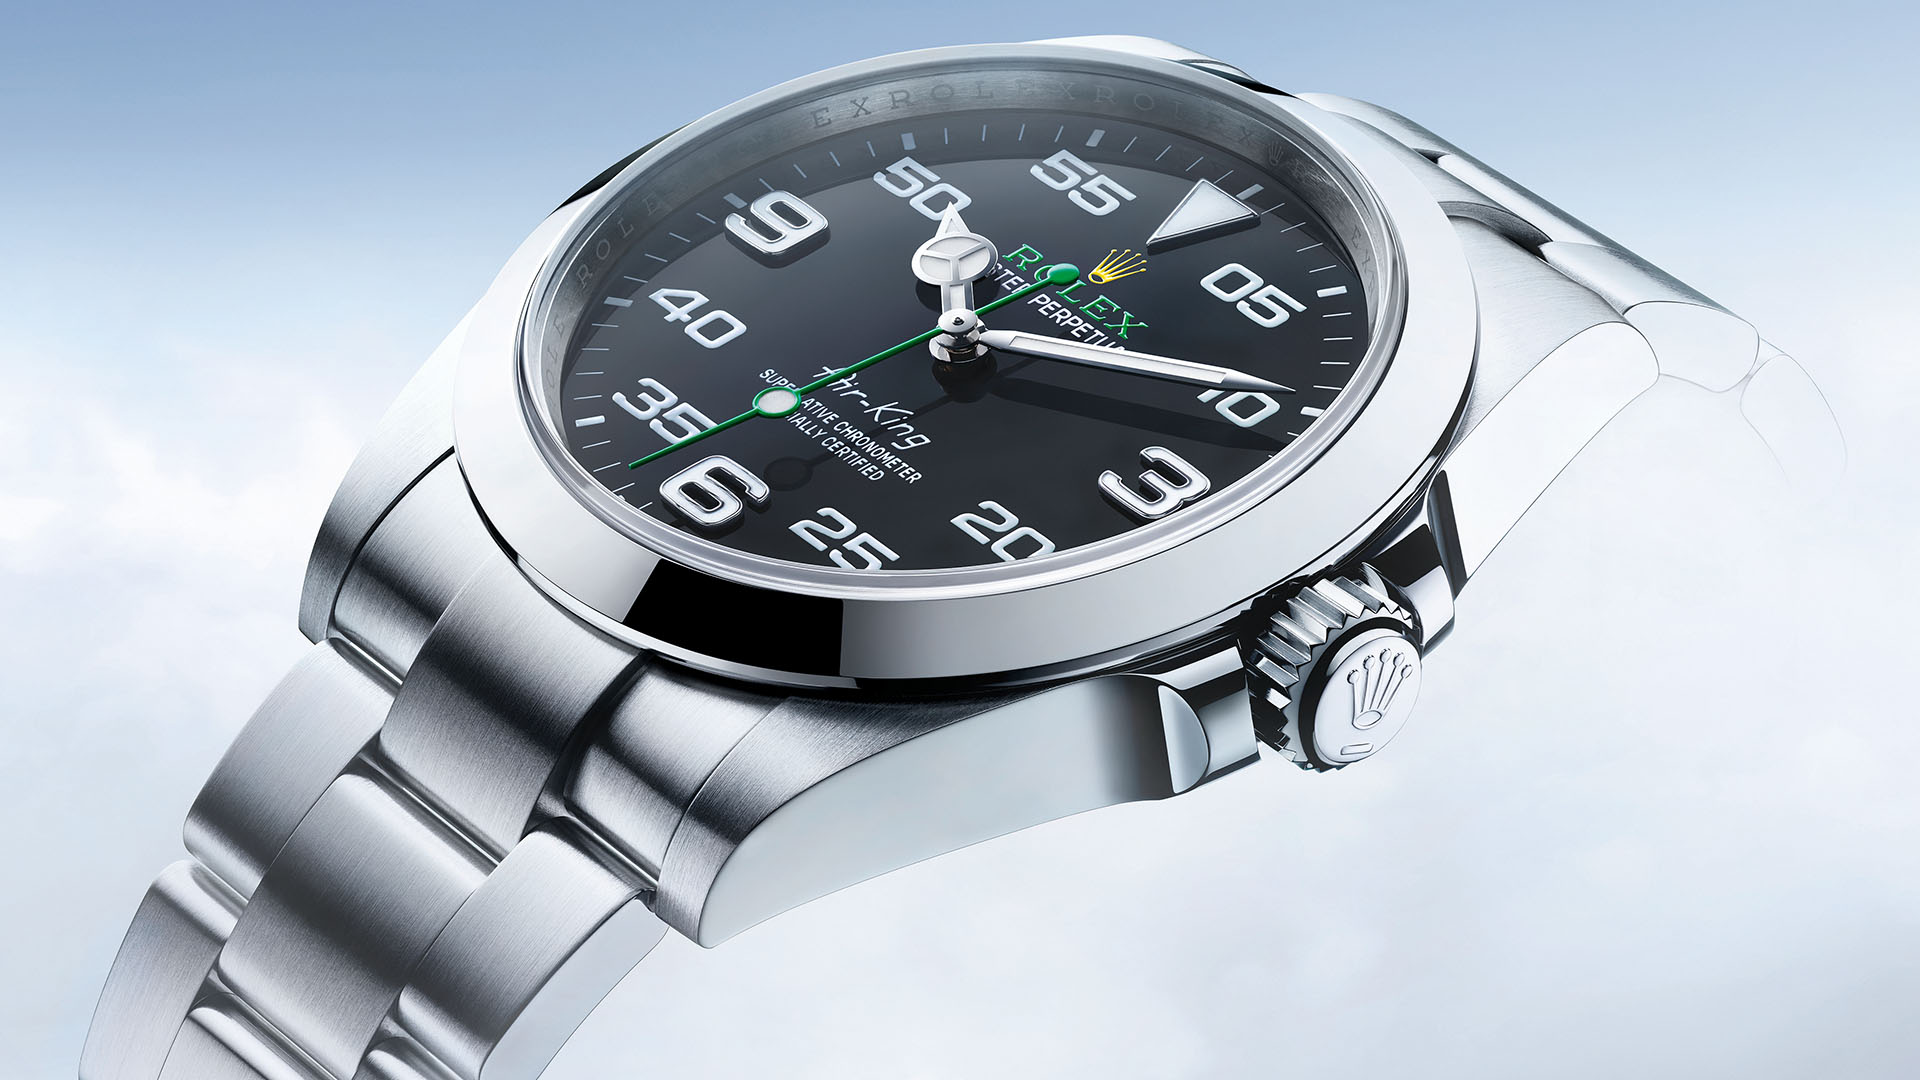 First Look: Rolex Air-King Watch With Redesigned Case And New Numerals |  aBlogtoWatch